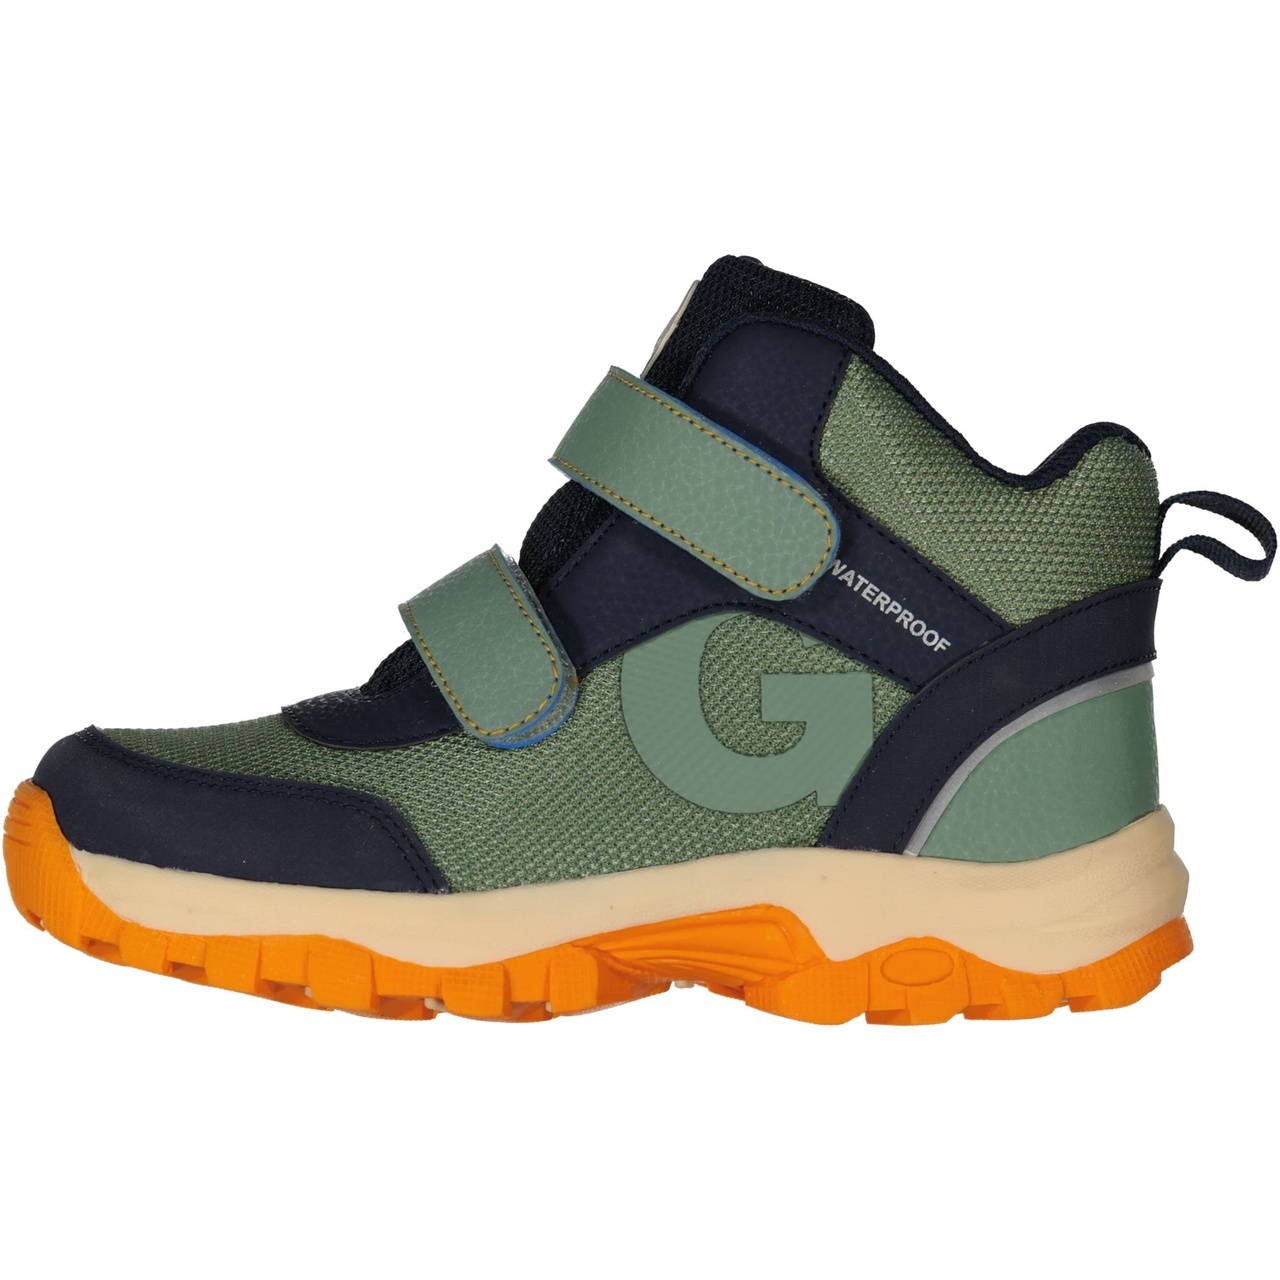 All weather shoes Moss green  37 (24,5 cm)